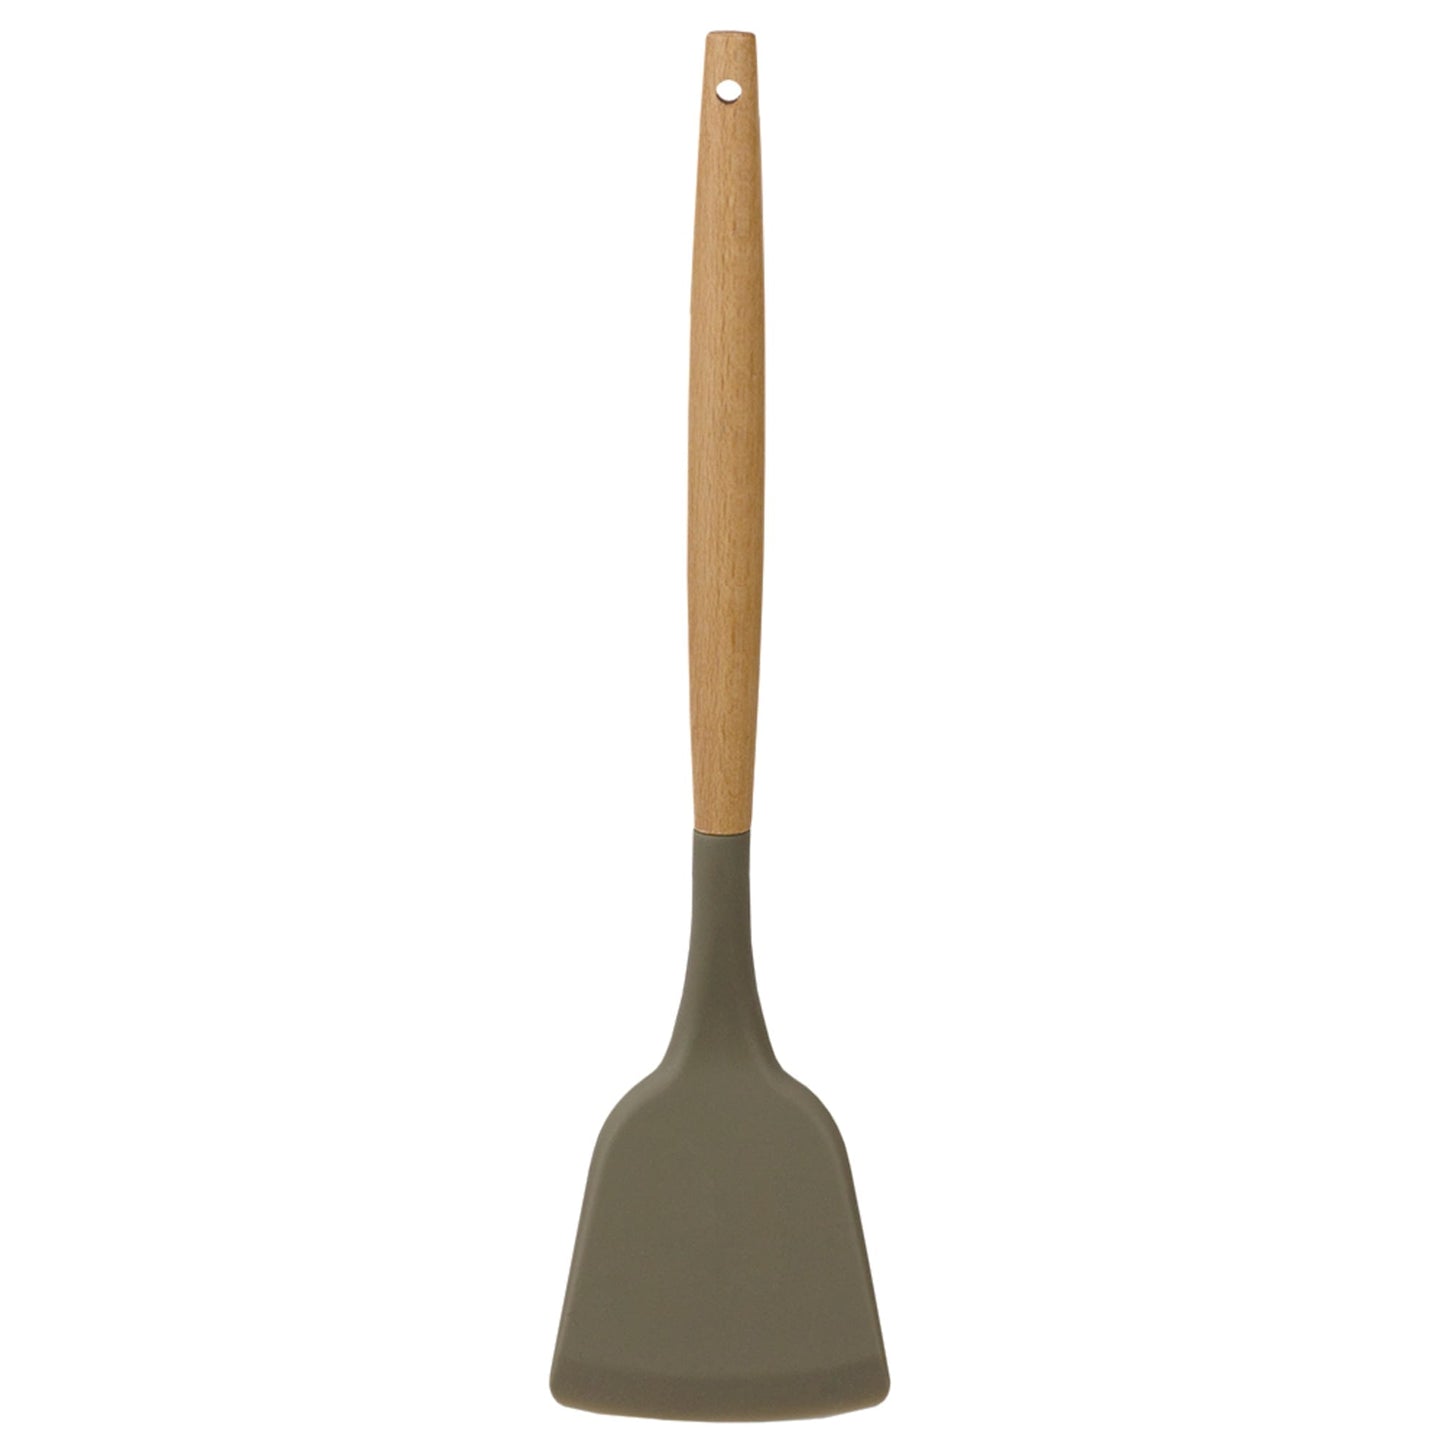 Karina High-Heat Resistance Non-Stick Safe Silicone Spatula with Easy Grip Beech Wood Handle, Grey